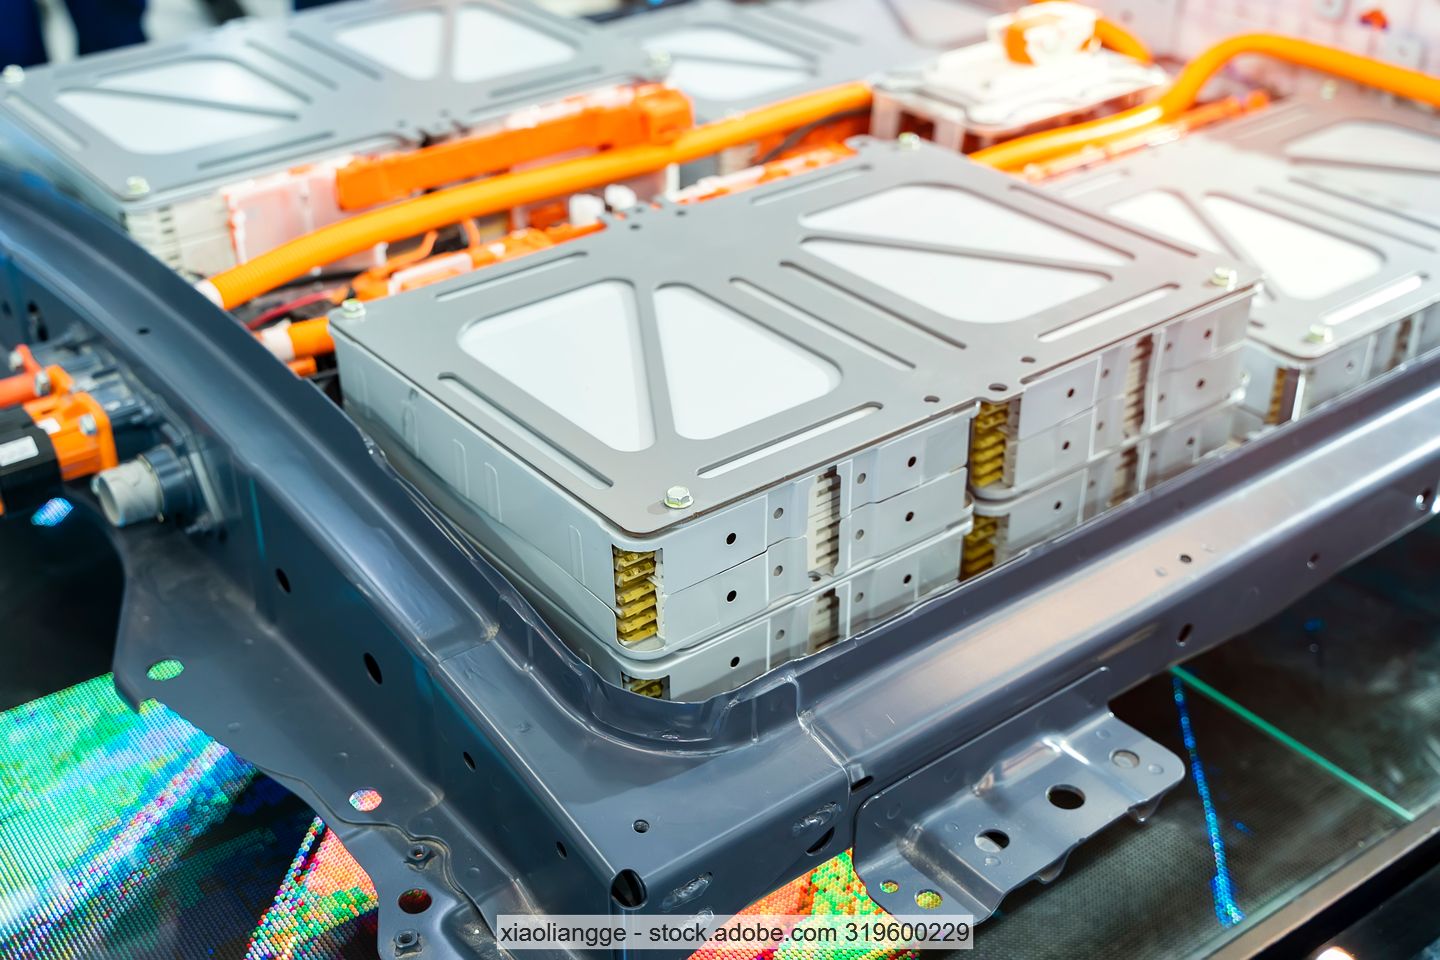 Traction battery of an electric vehicle